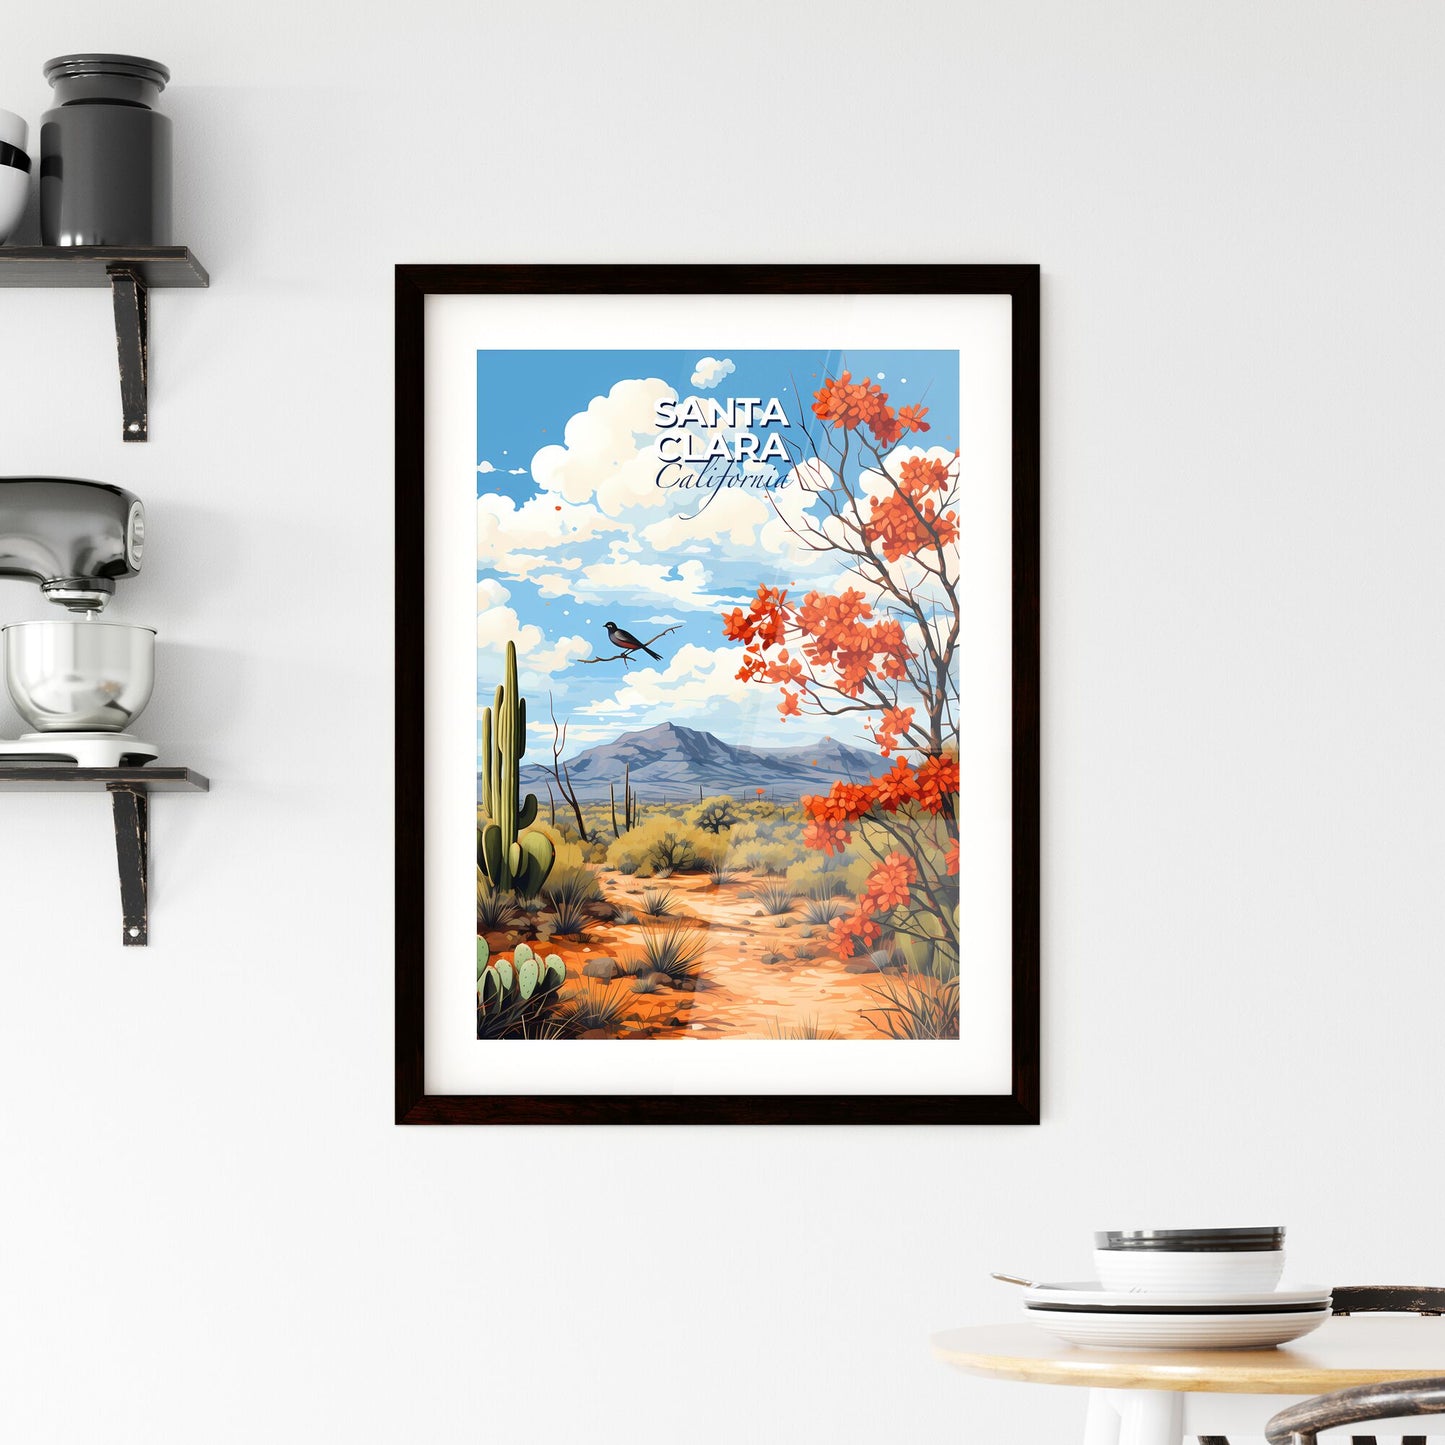 Santa Clara, California, A Poster of a landscape with cactus and a bird Default Title